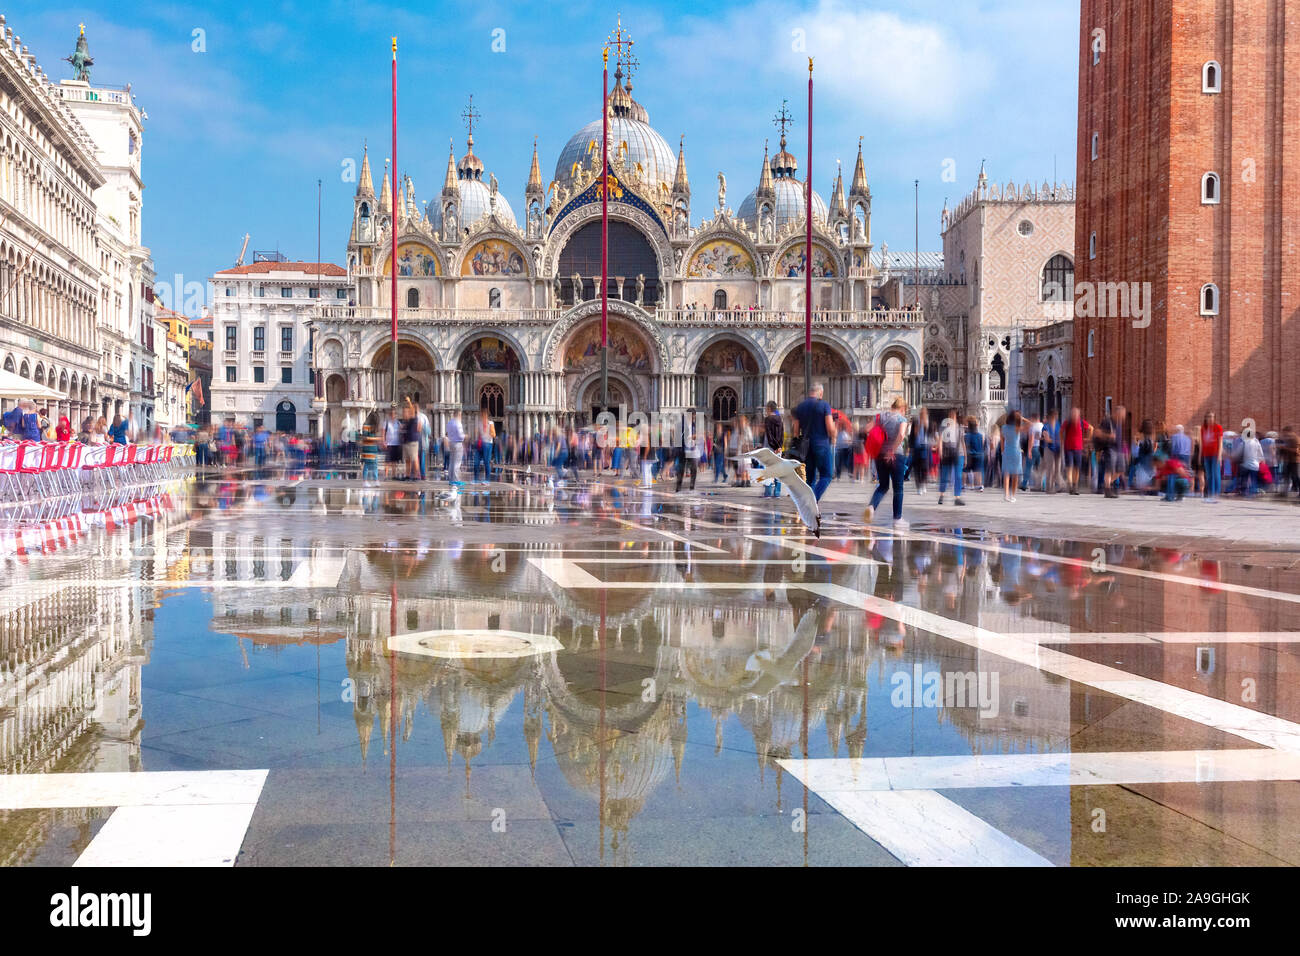 Cathedral Basilica of Saint Mark and Piazza San Marco, St Mark Square, deluged by flood water during Acqua alta which means High water, Venice, Italy Stock Photo